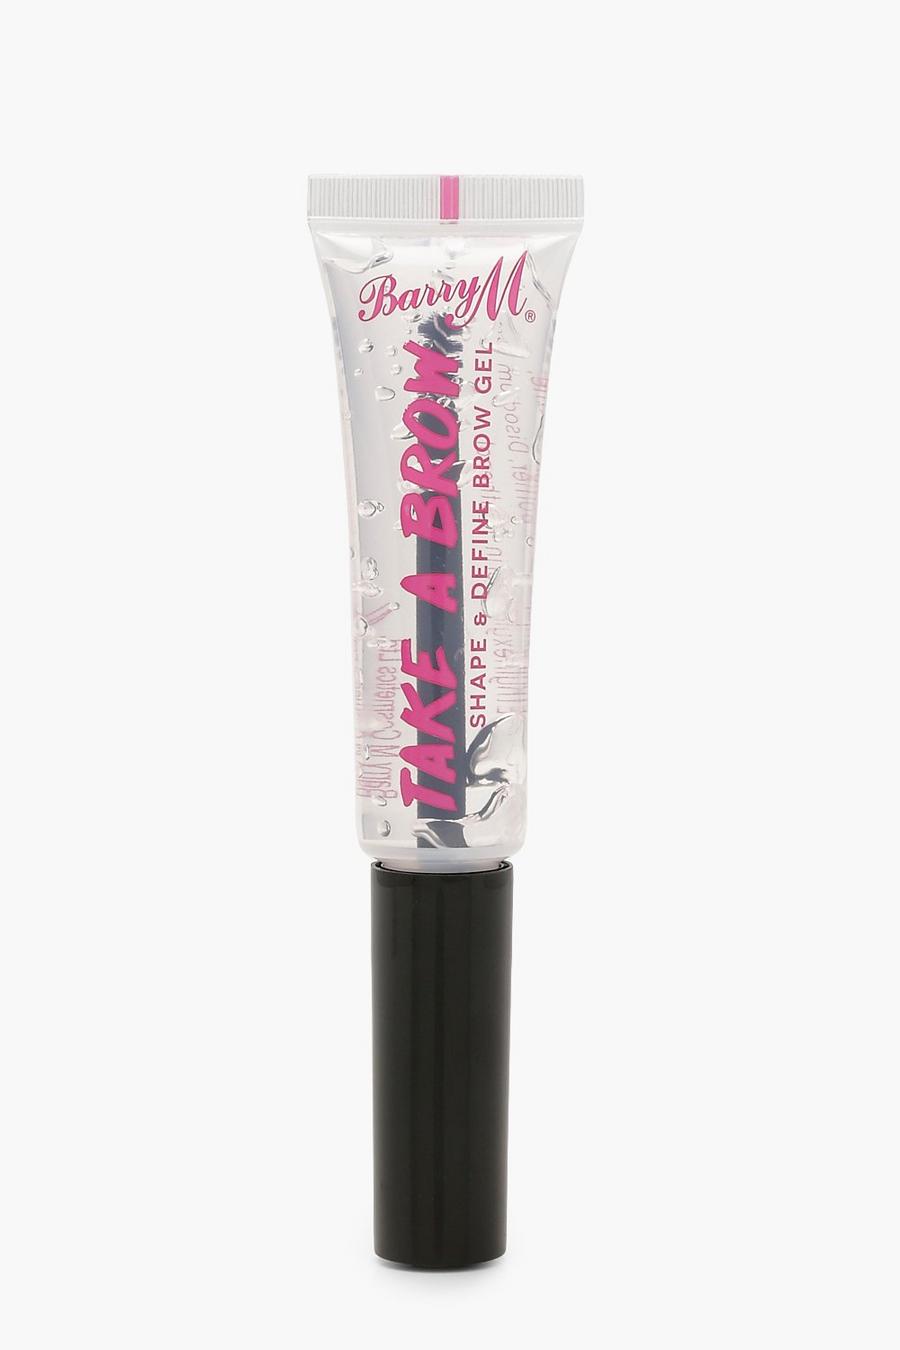 Clear transparent Barry M Take A Brow Gel